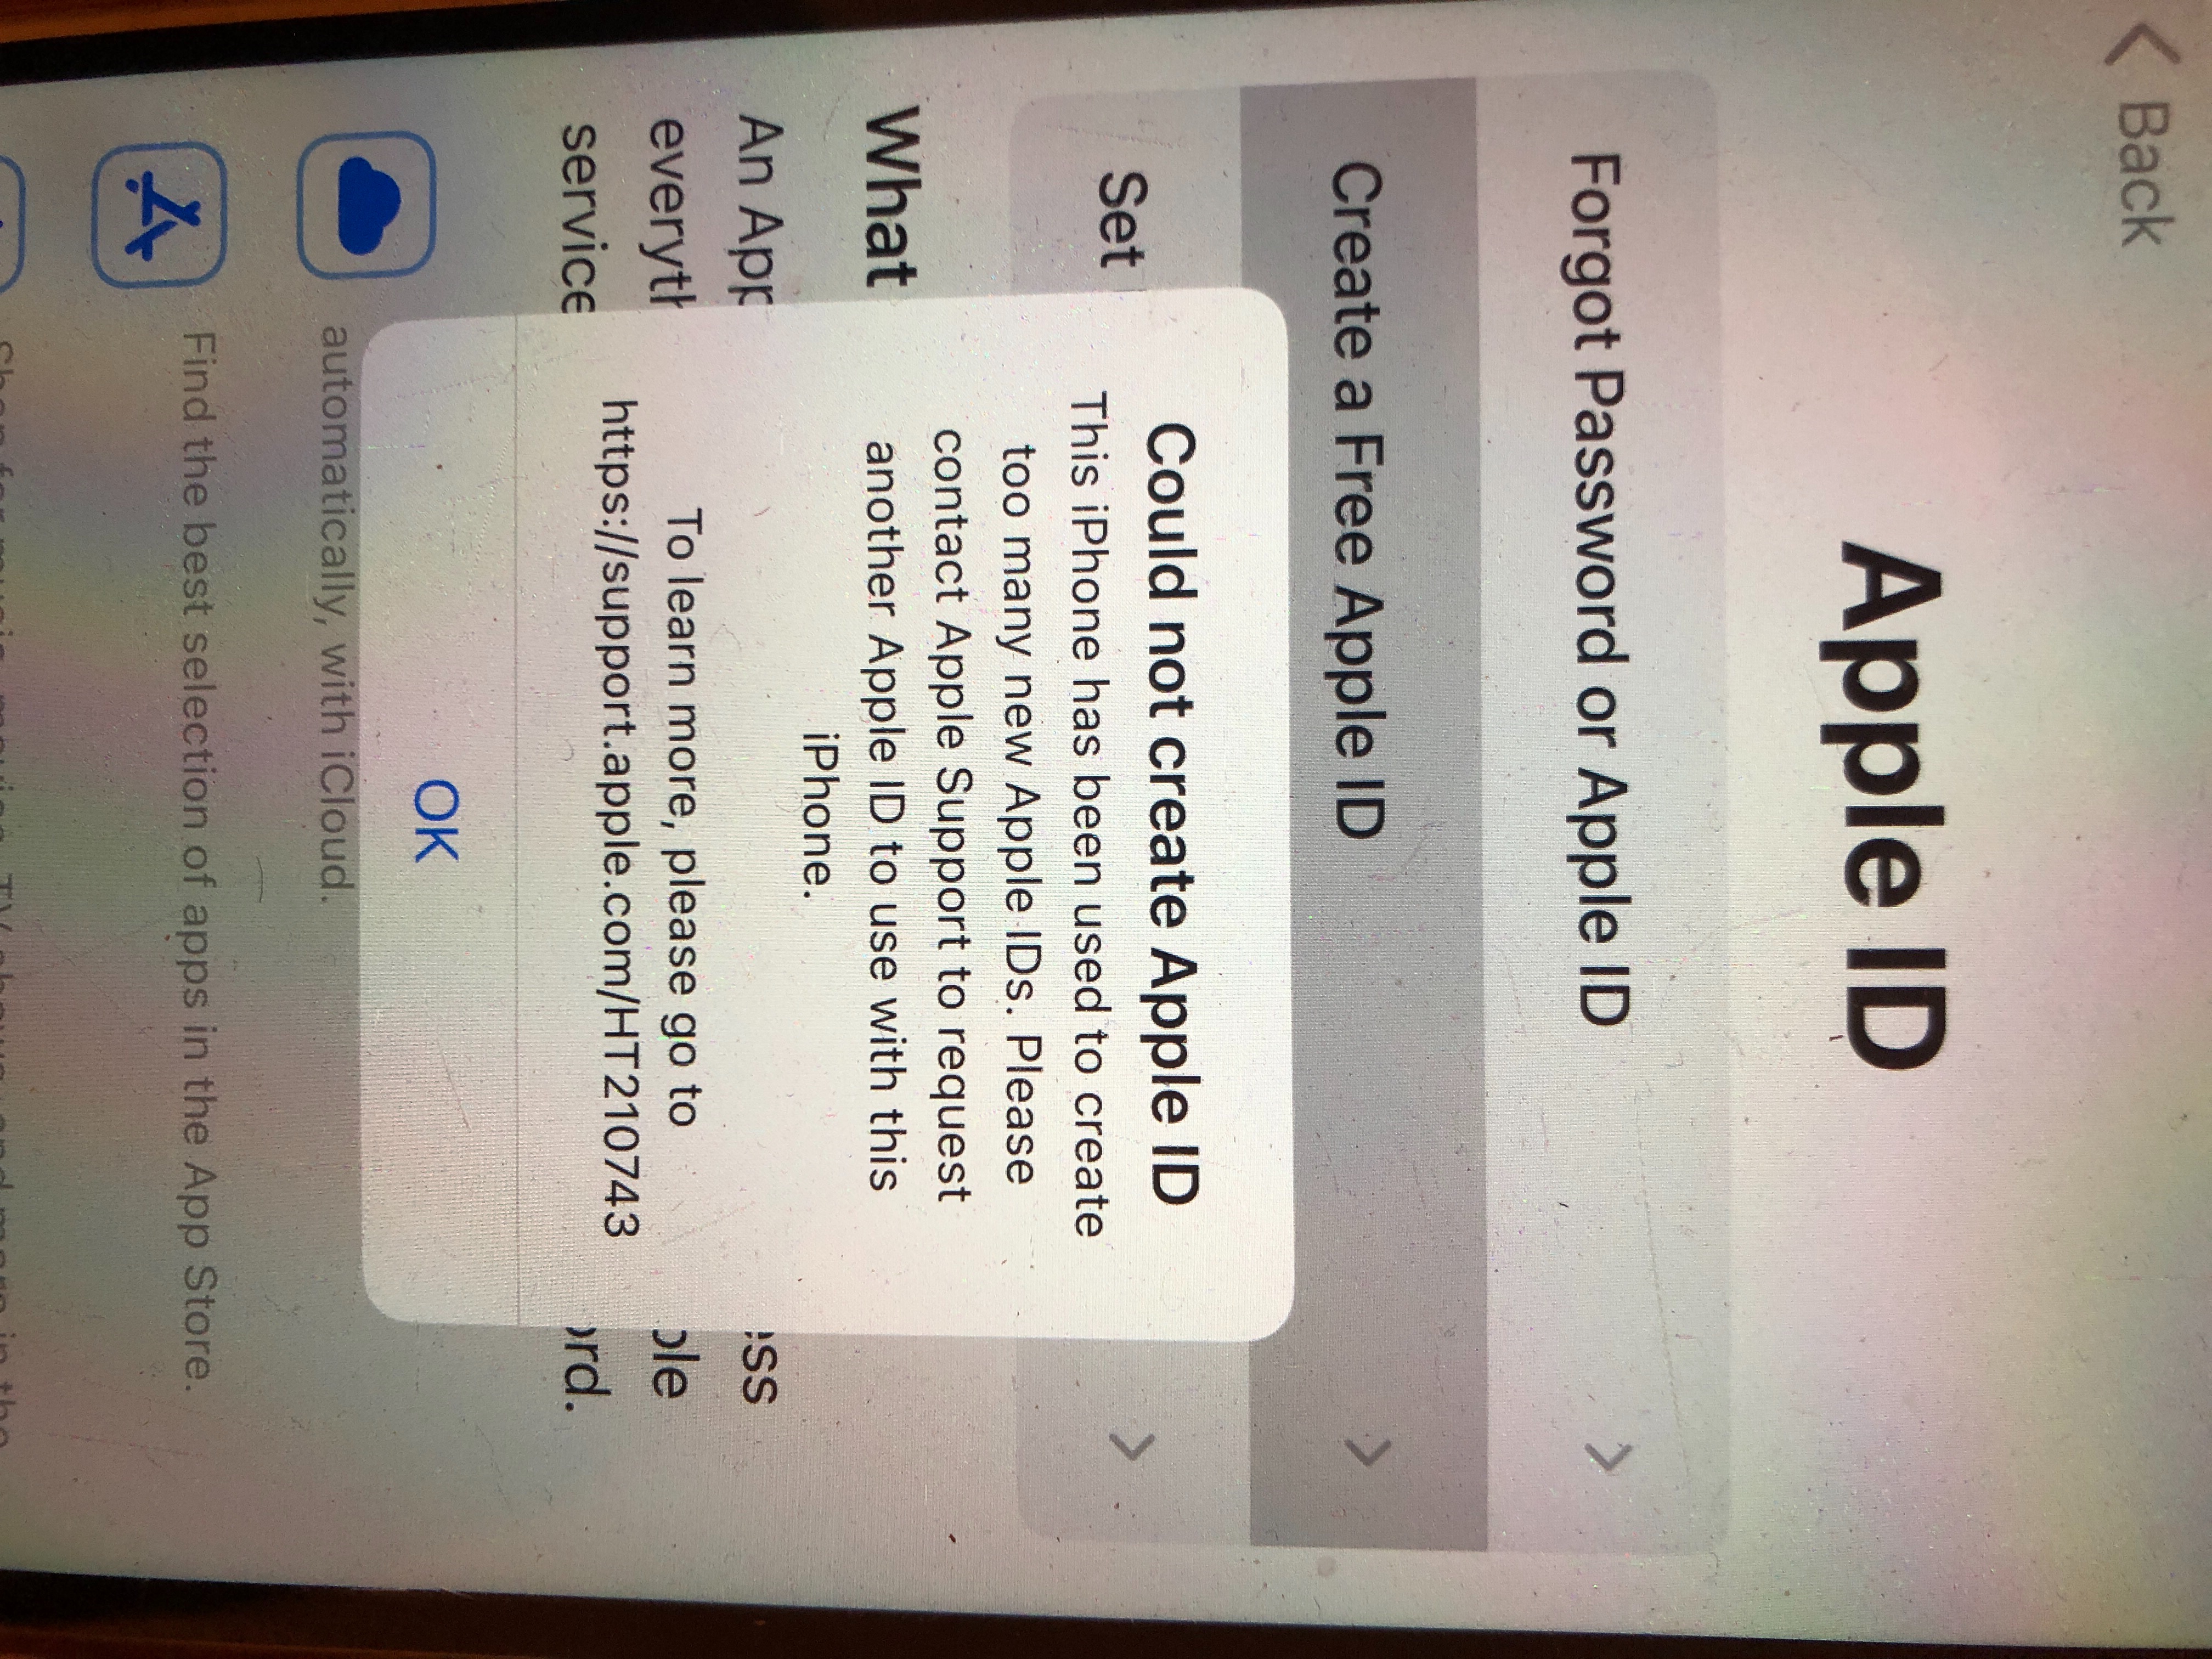 My name real for id? have i to use do apple ios provisioning